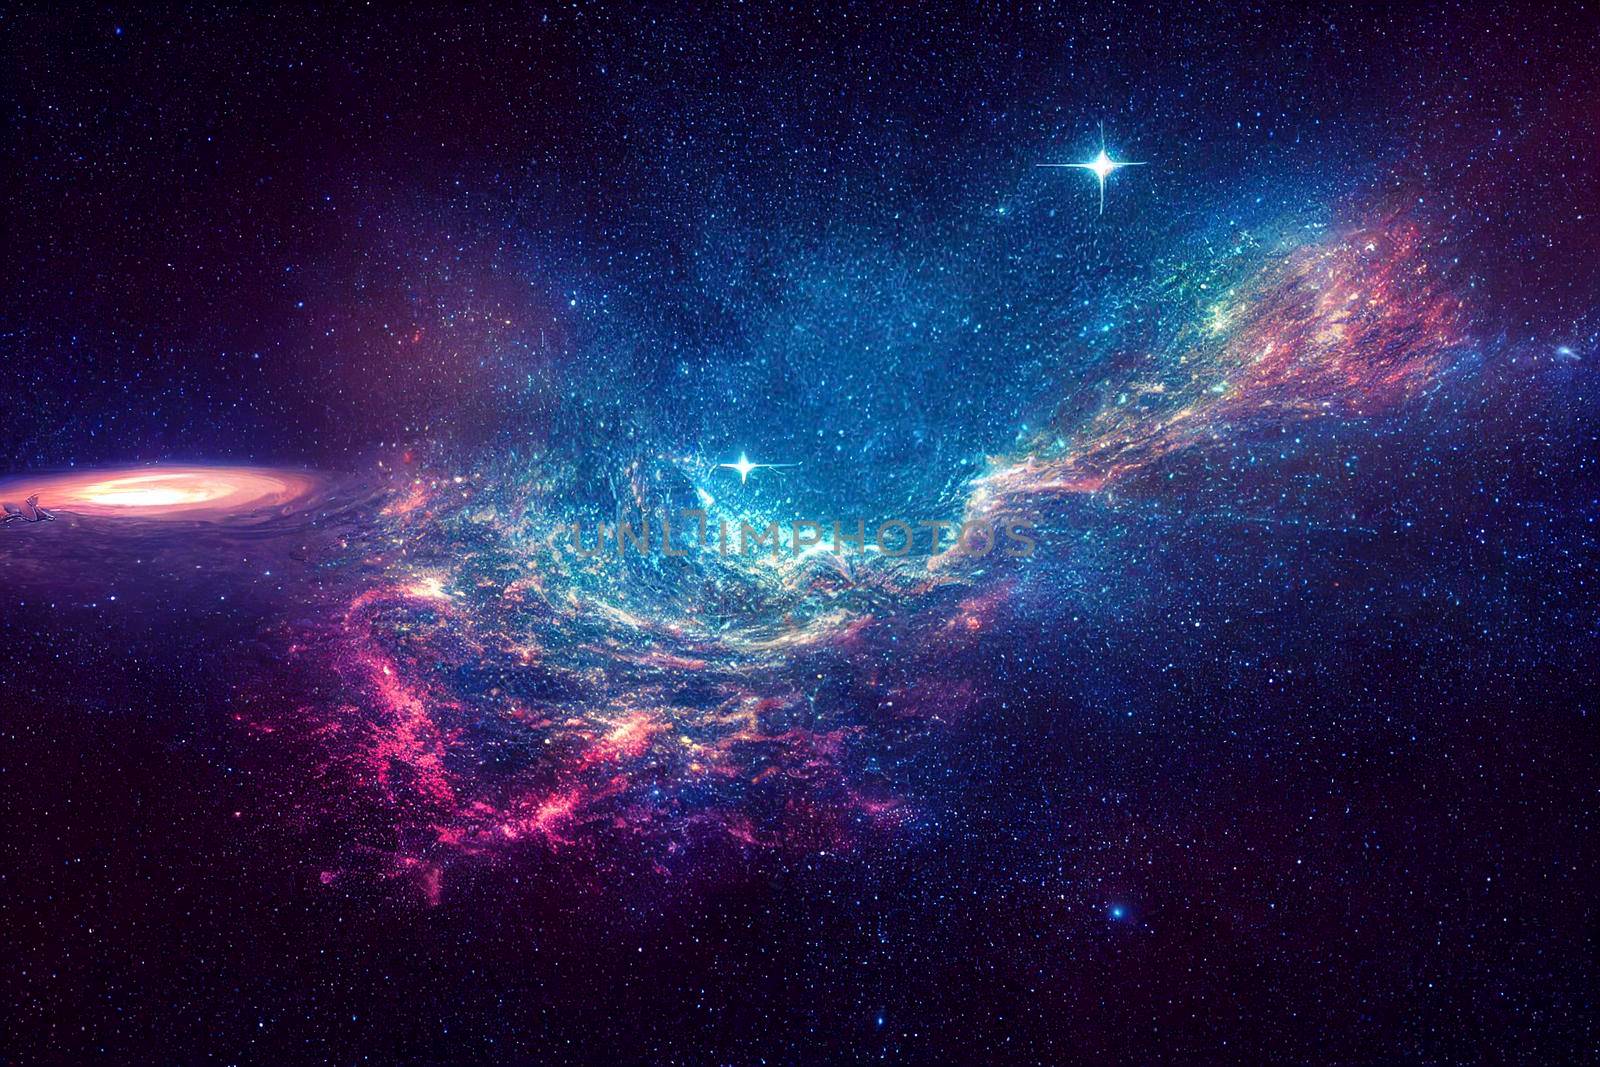 Cosmic landscape, colorful science fiction wallpaper with endless outer space. by jbruiz78